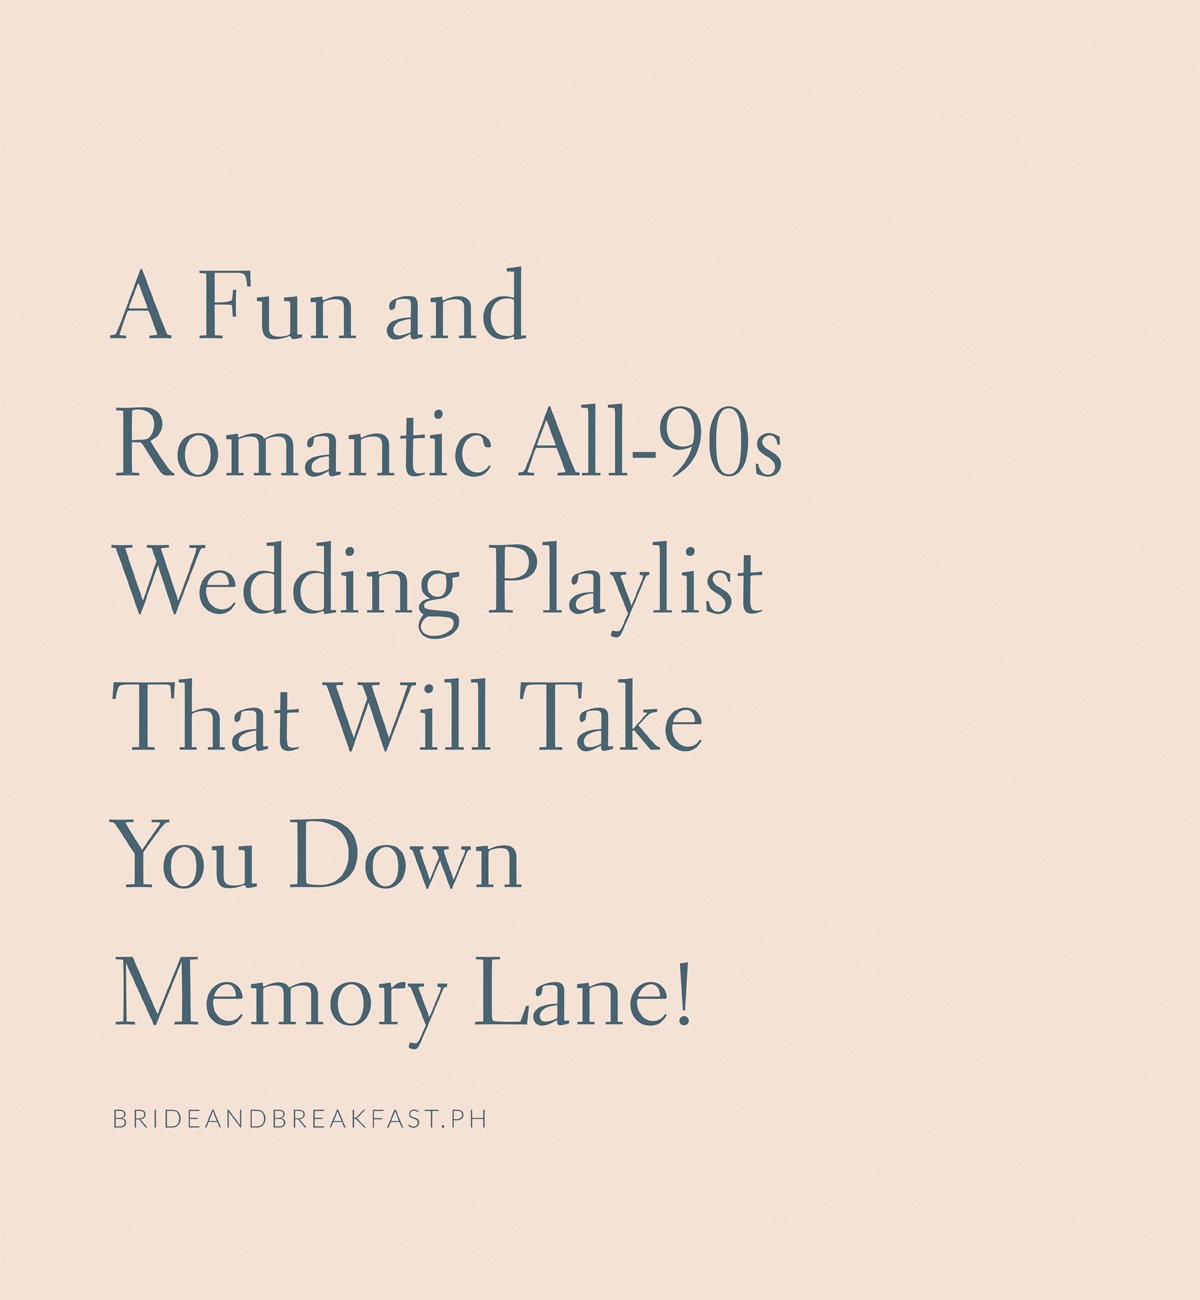 A Fun and Romantic All-90s Wedding Playlist That Will Take You Down Memory Lane!